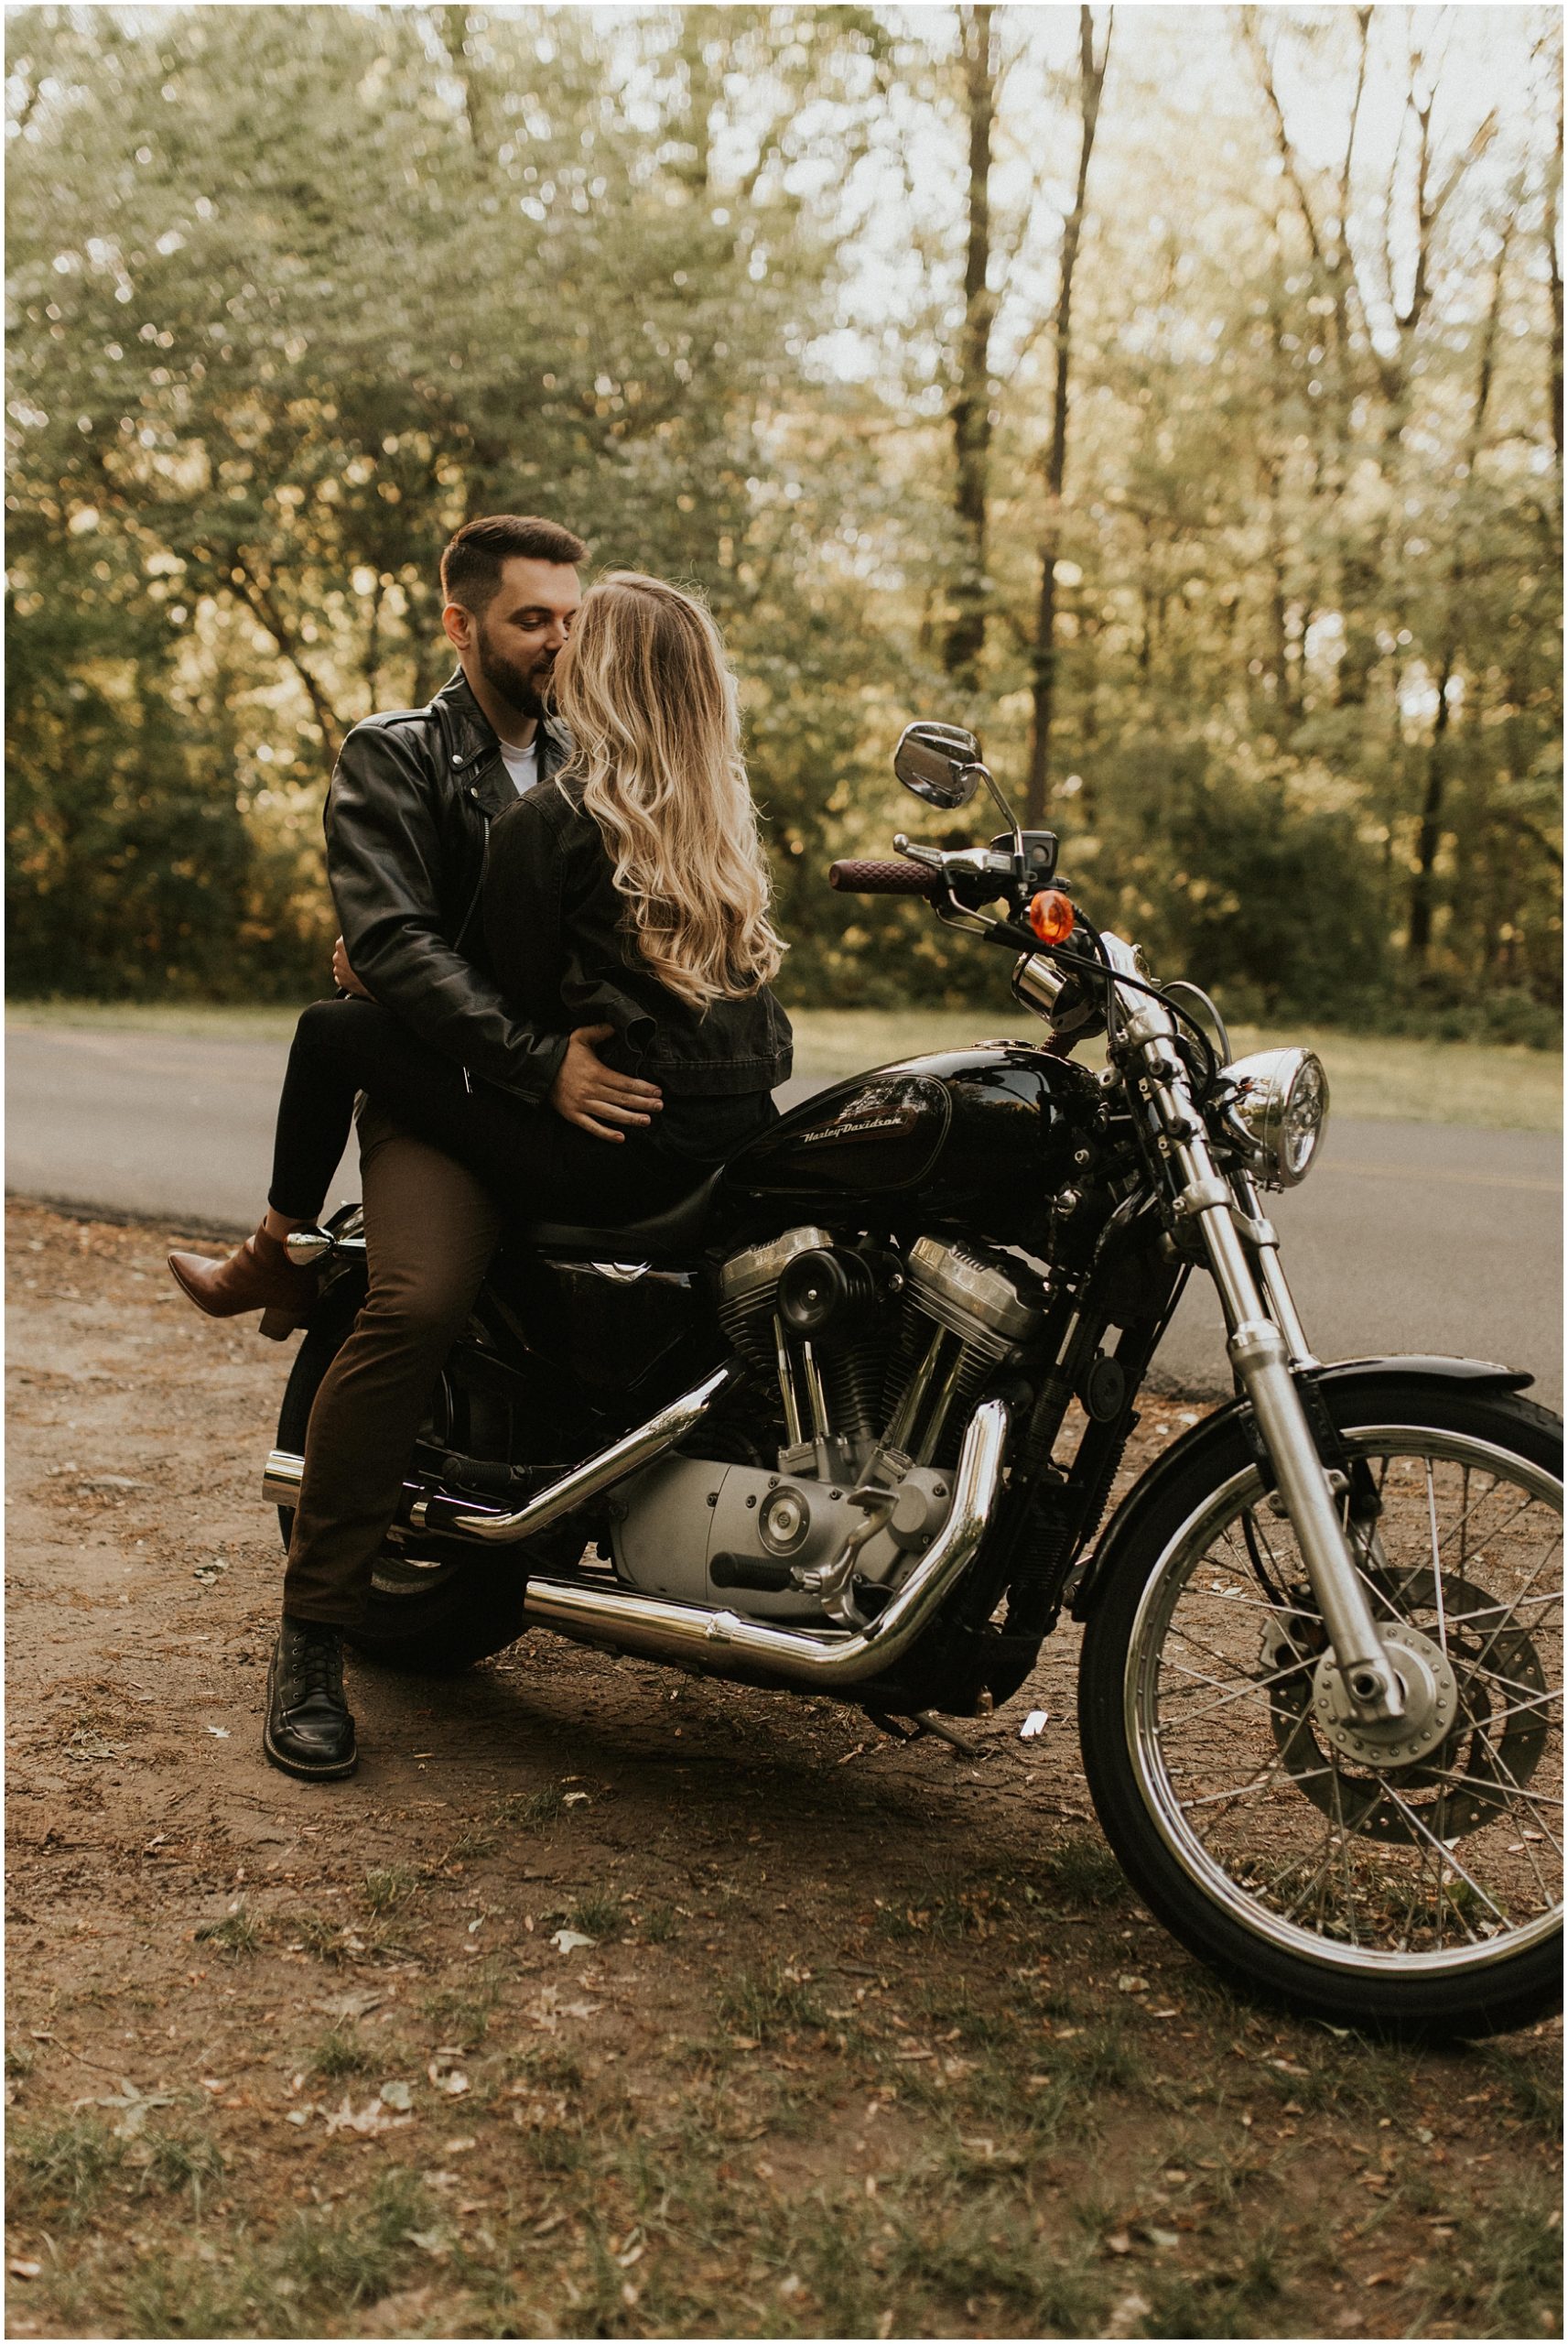 Edgy Motorcycle Couples Session | Reston, Virginia - hannahbaldwinphotography.com